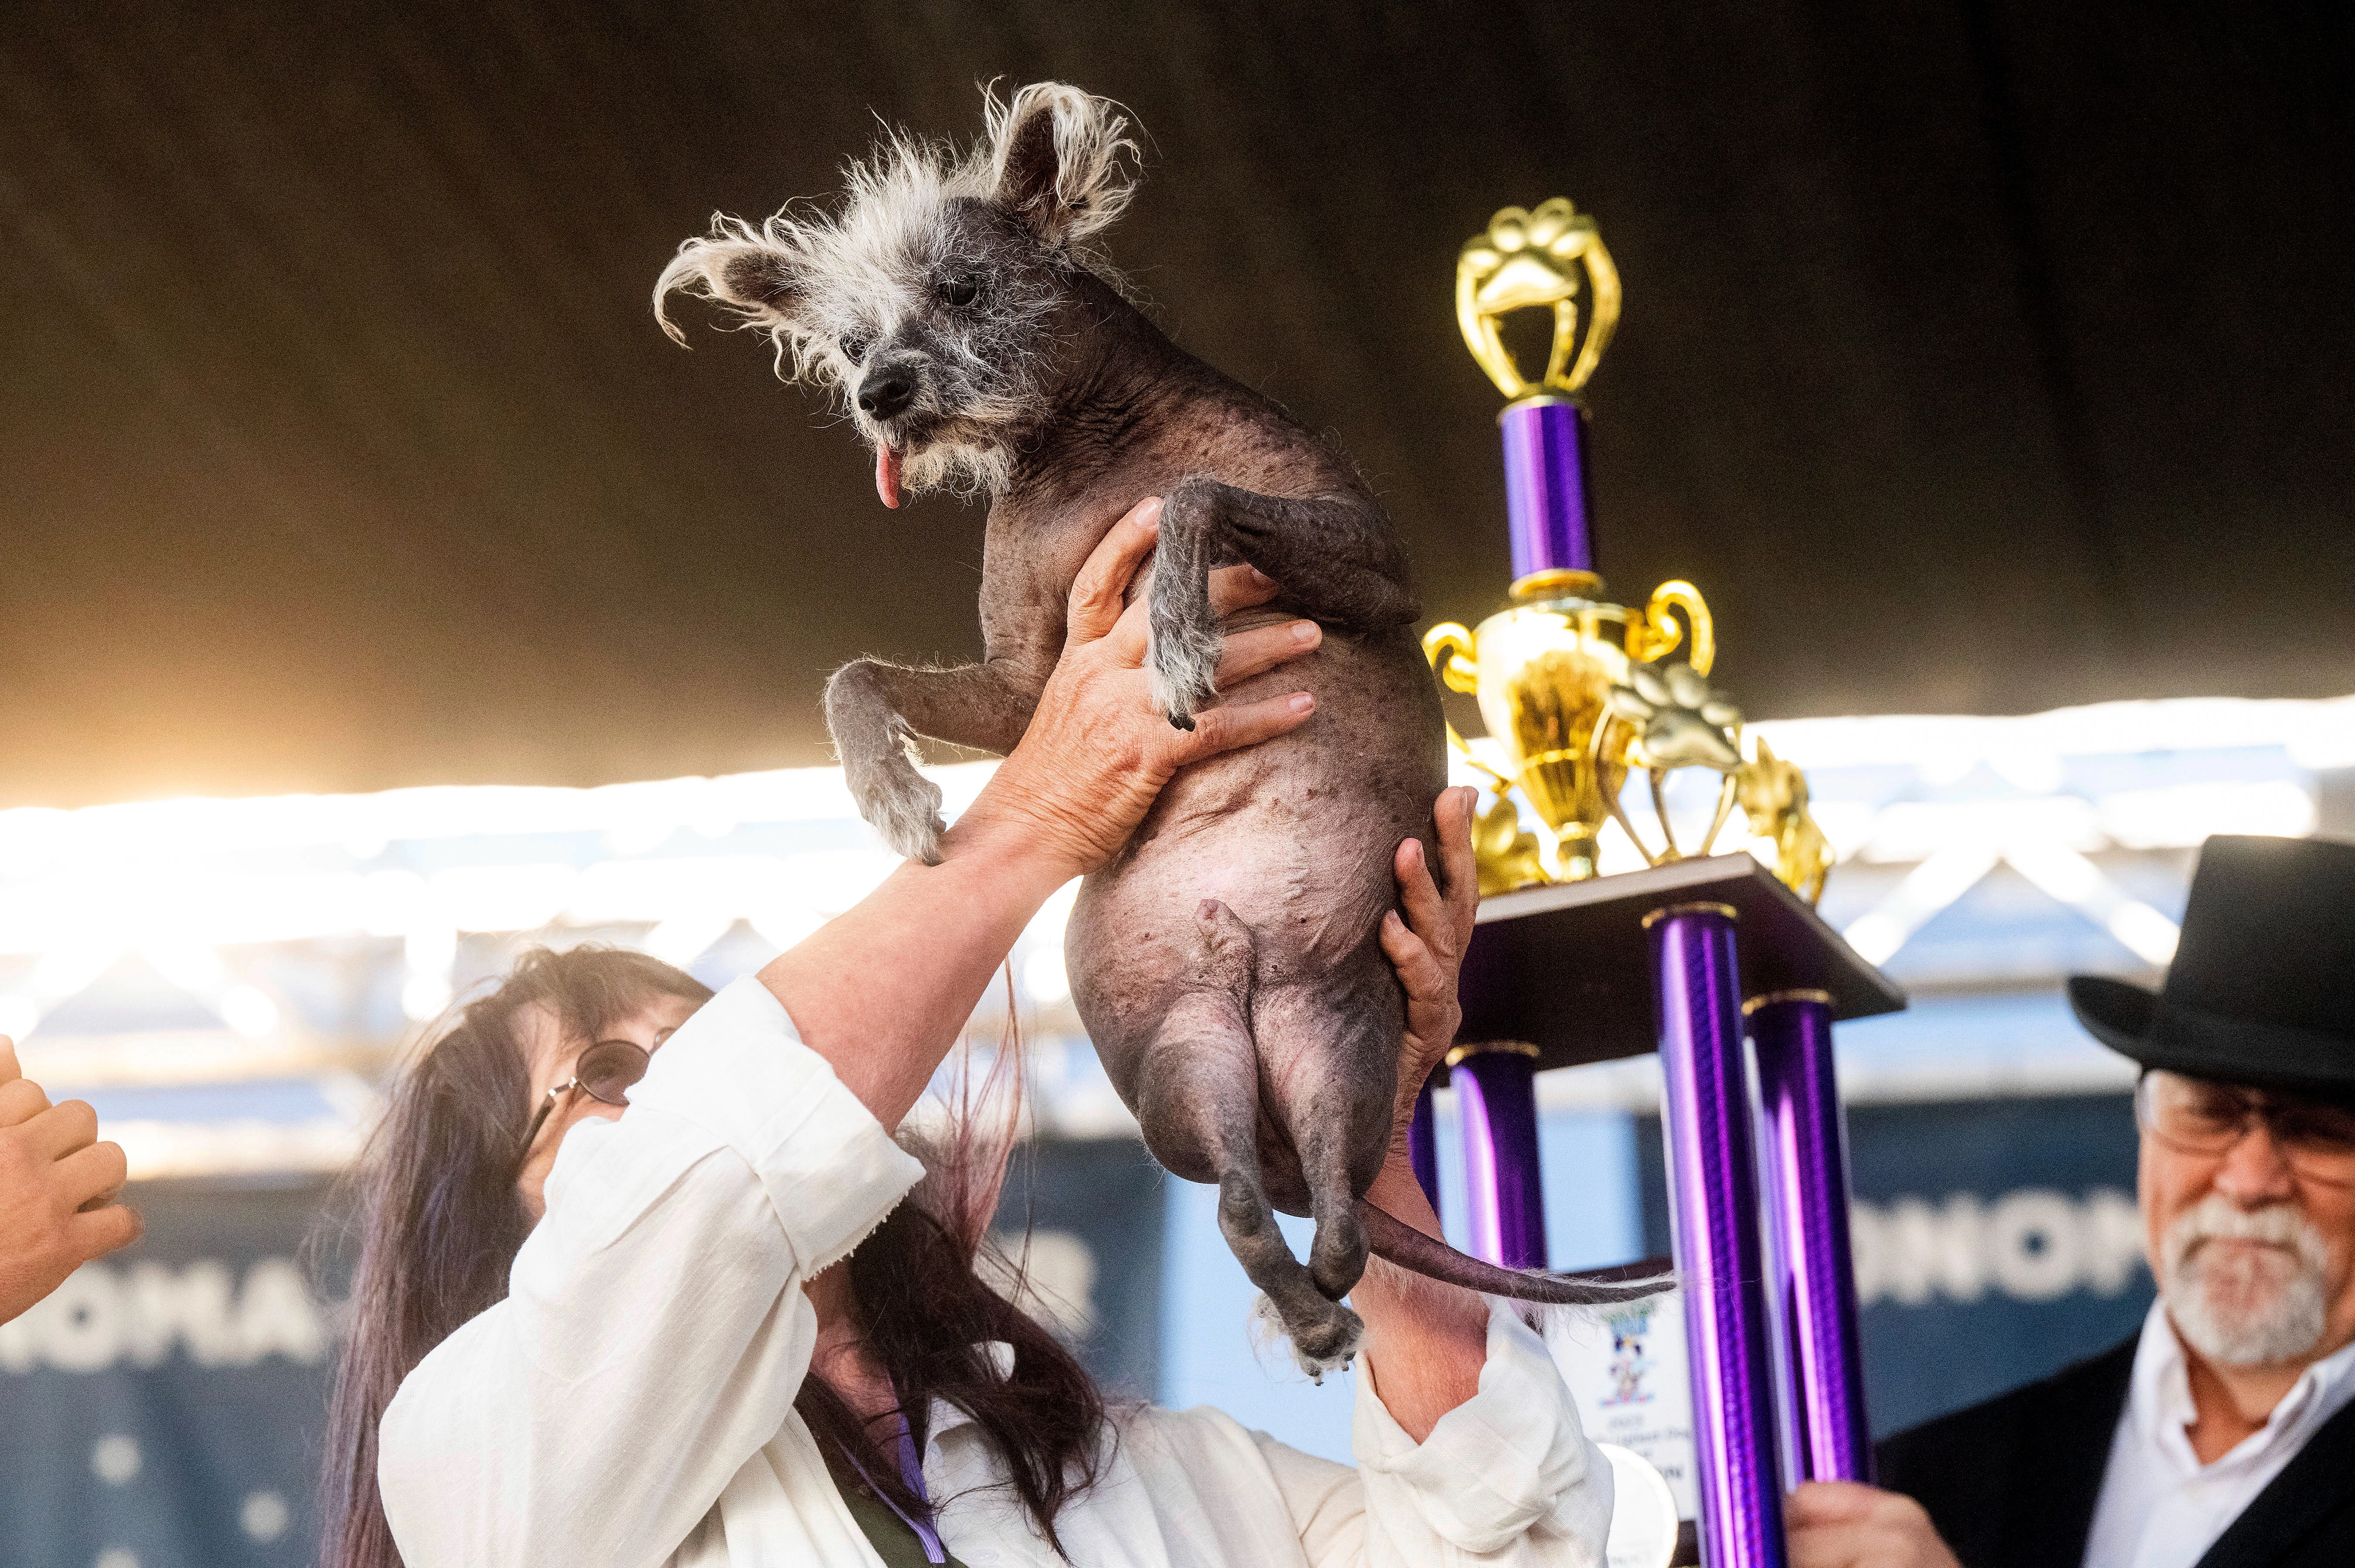 Introducing Scooter: 'The World's Ugliest Dog' with a Heart of Gold